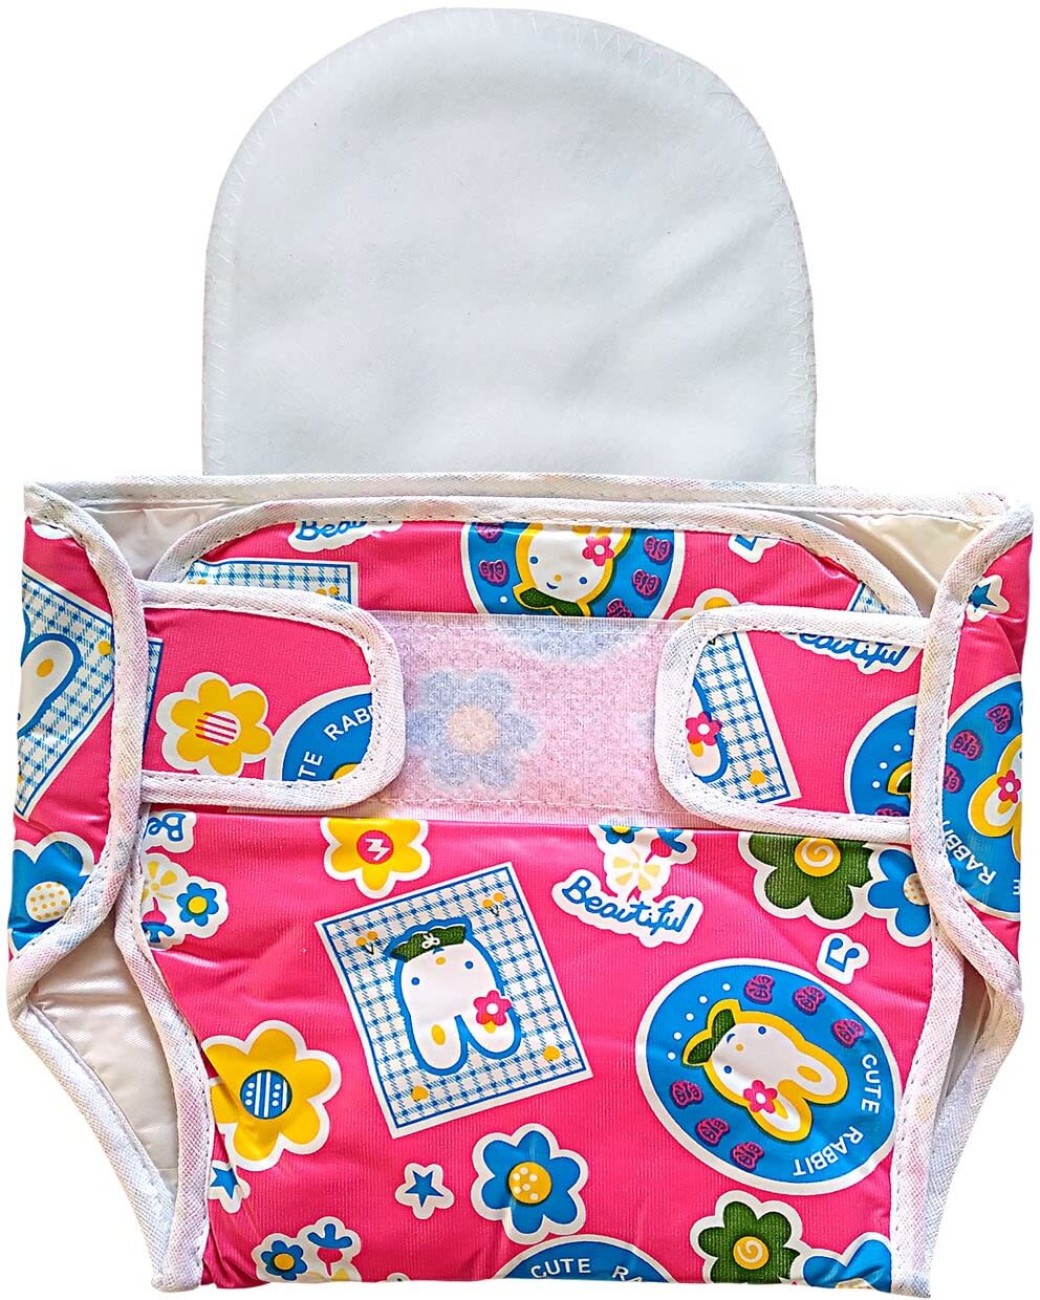 PIKIPOO Baby Soft Plastic Diaper Liner Insert Reusable Waterproof Nappy For  6-9 Months